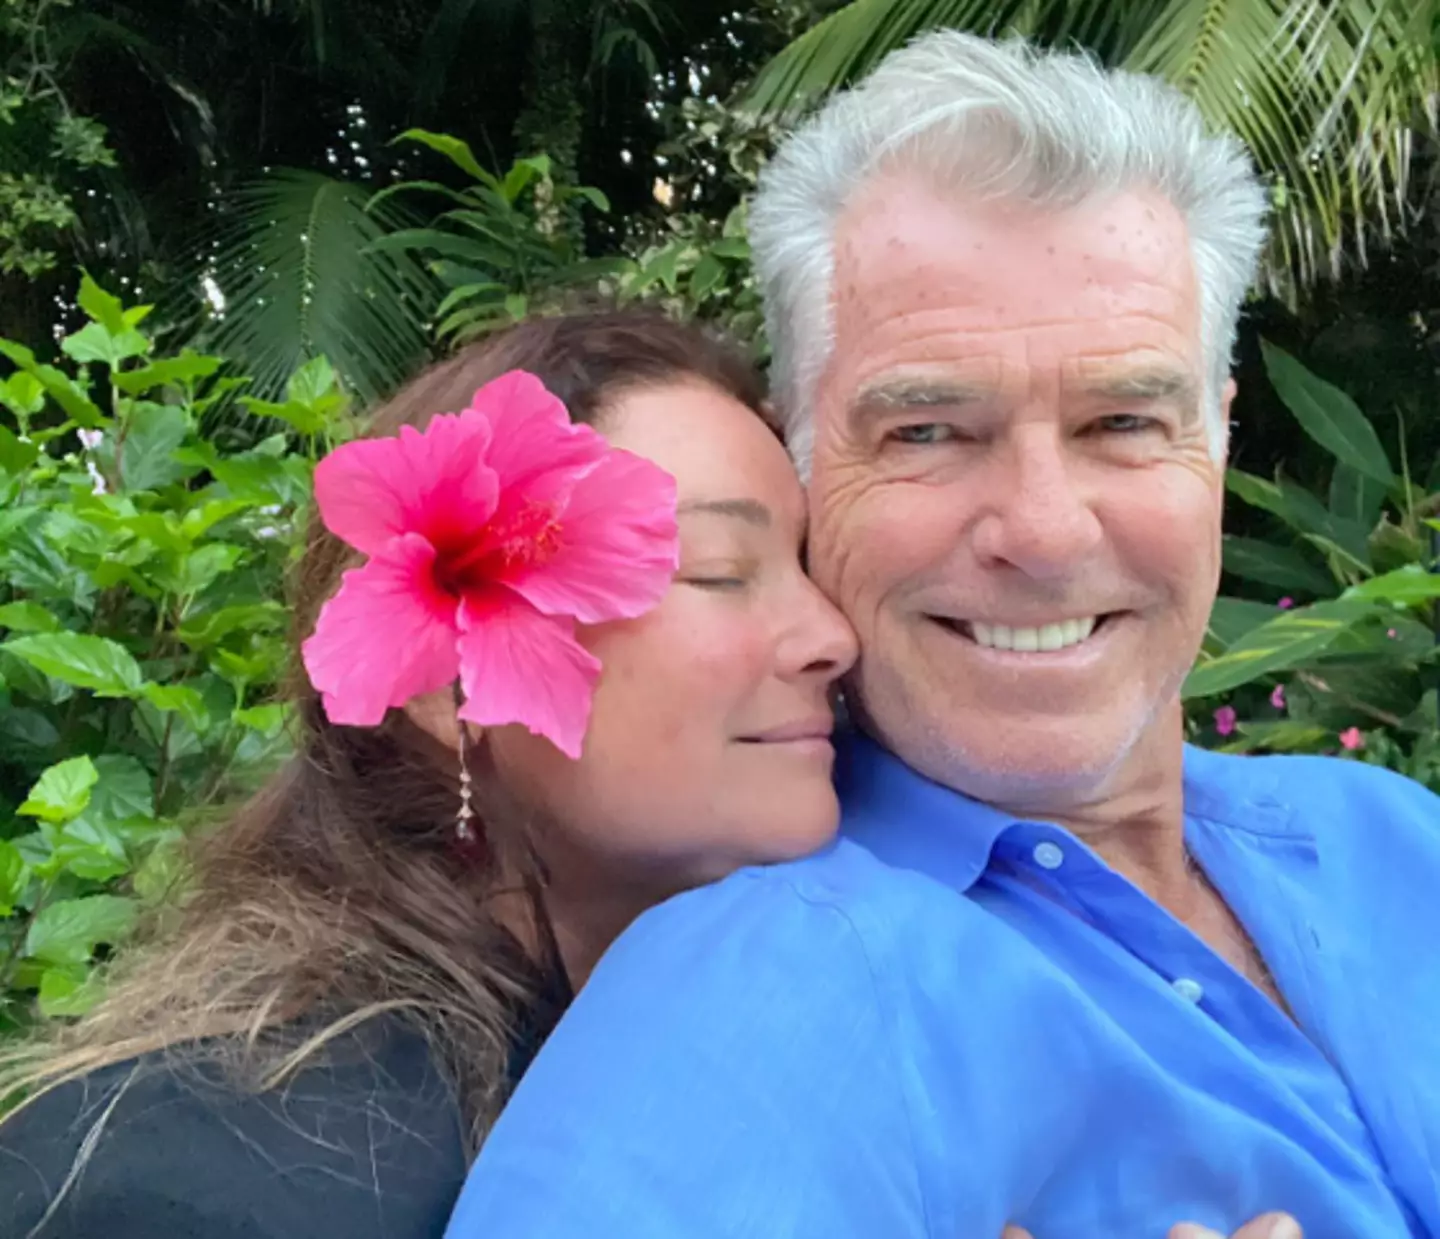 Pierce Brosnan and Keely Shaye Brosnan are the proud parents of two sons.